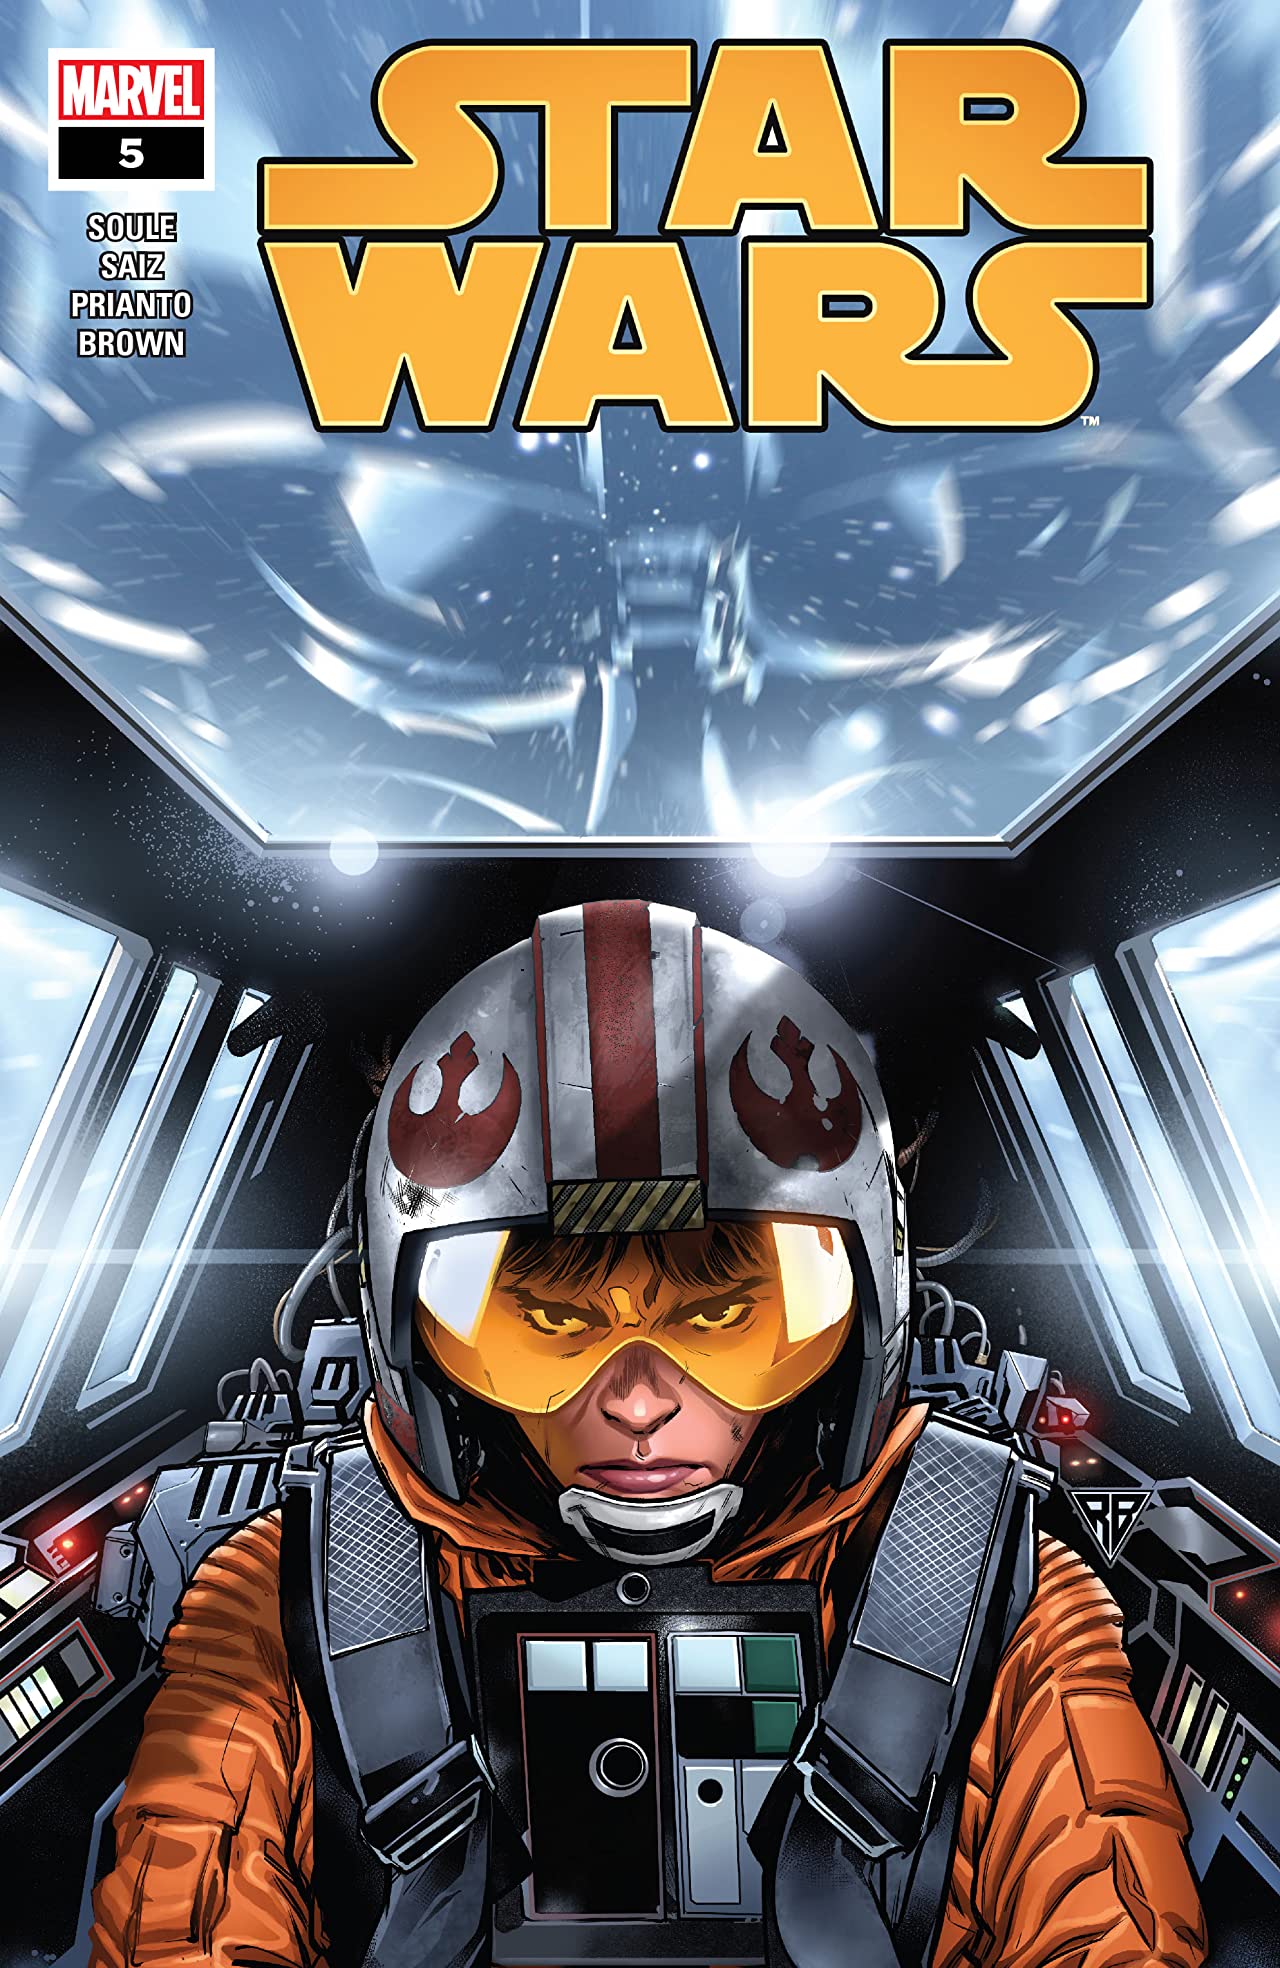 Star Wars 2020 issue 5 cover